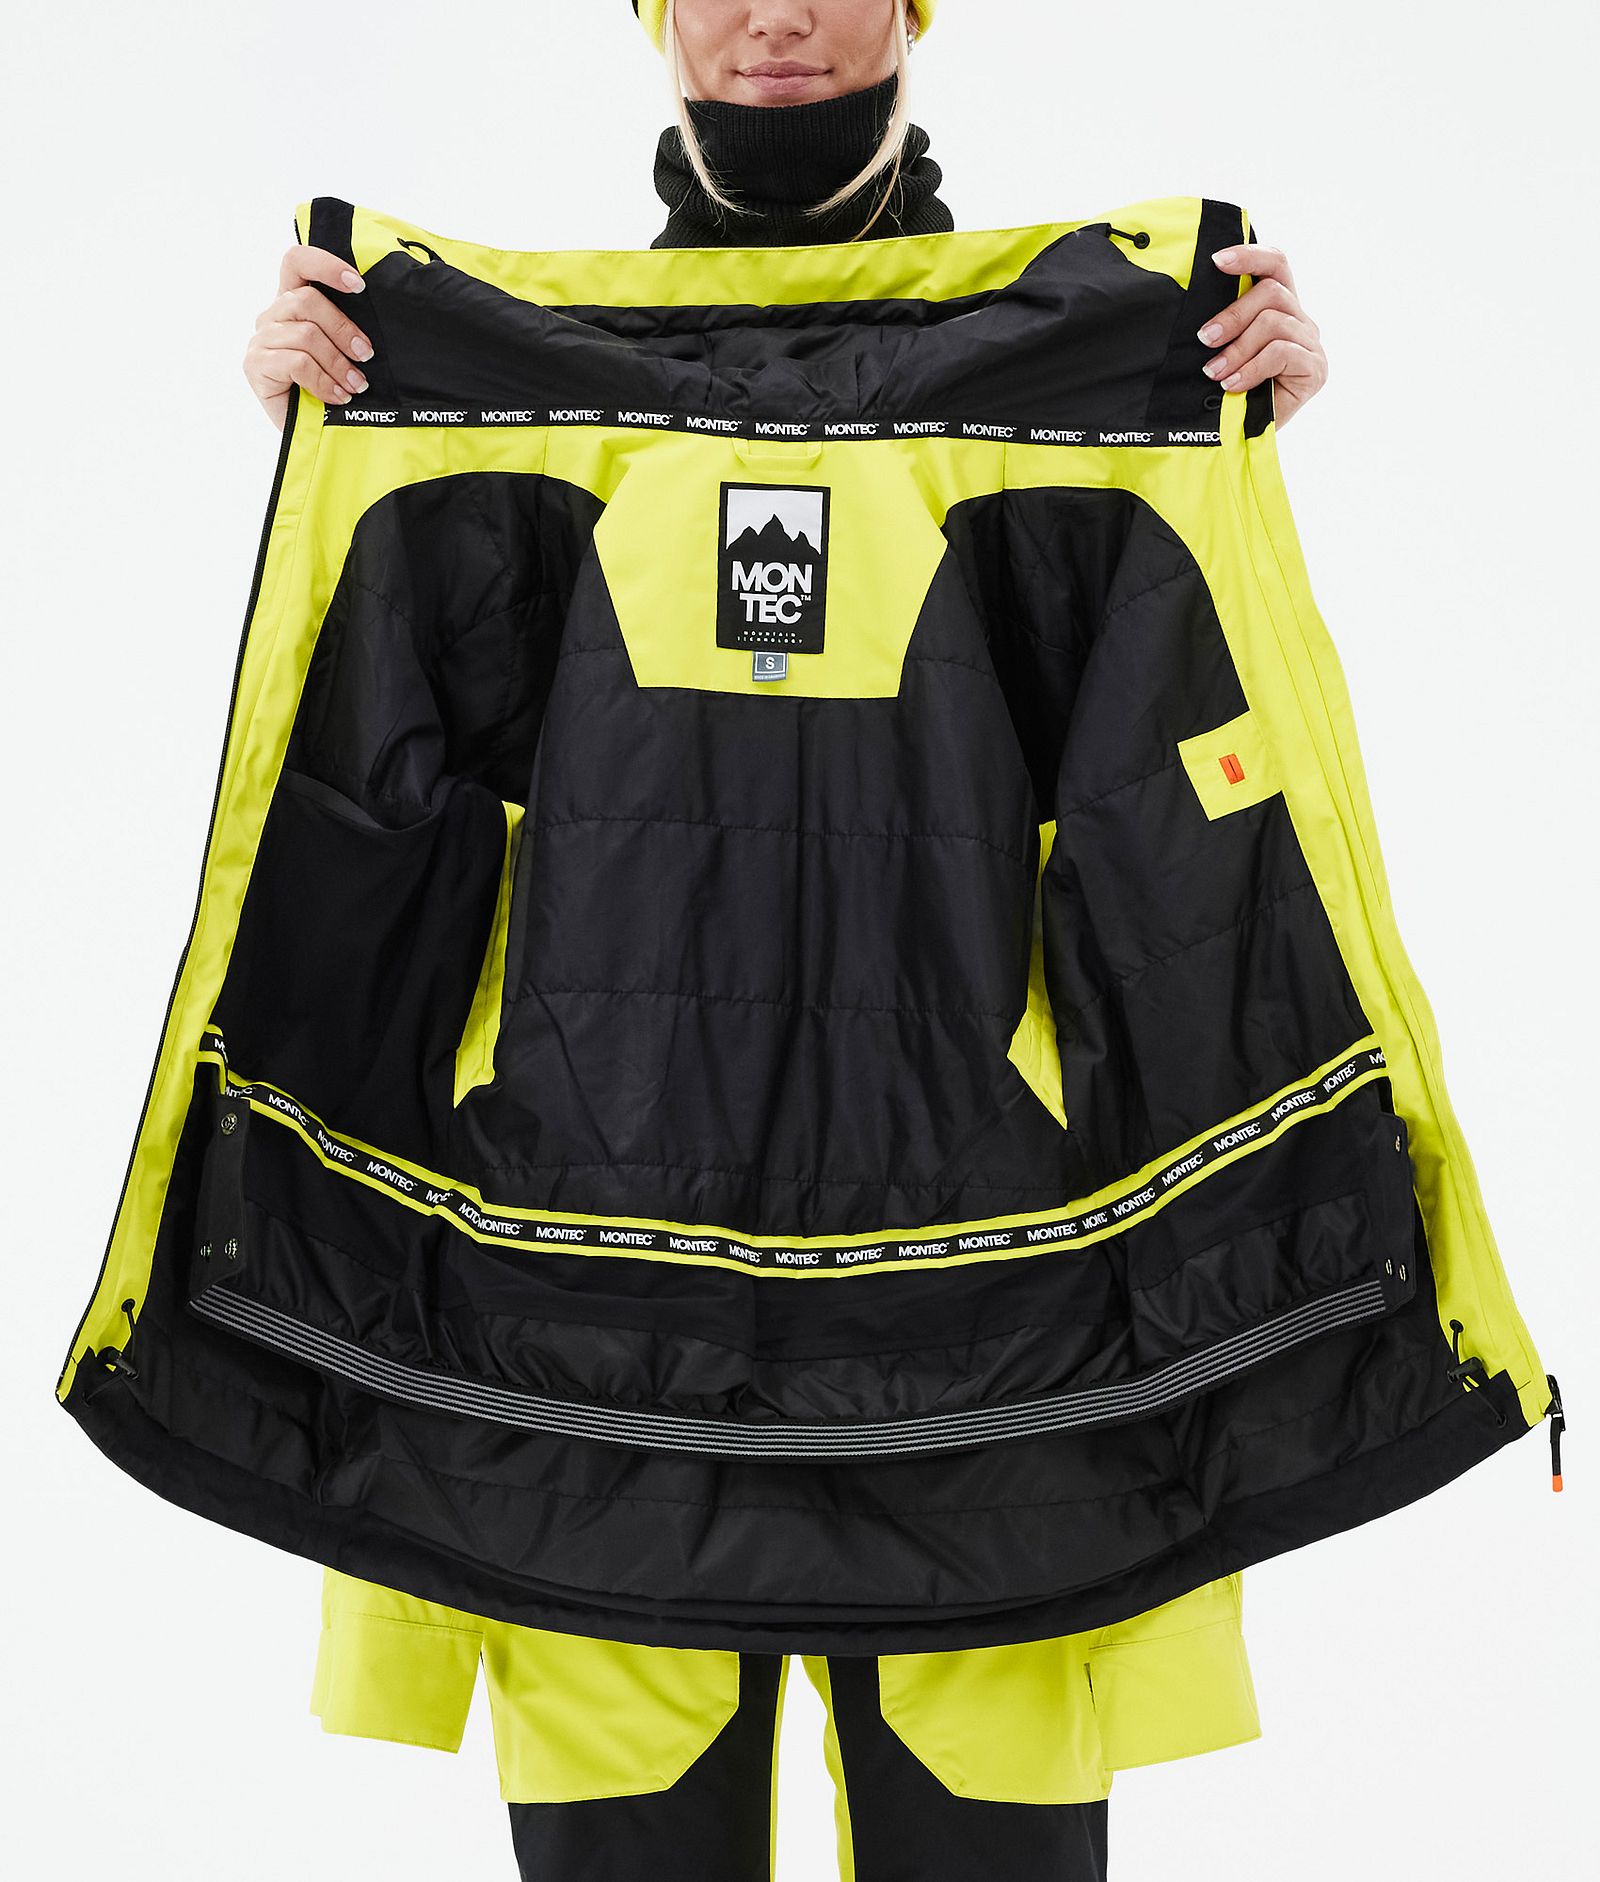 Montec Moss W Giacca Sci Donna Bright Yellow/Black